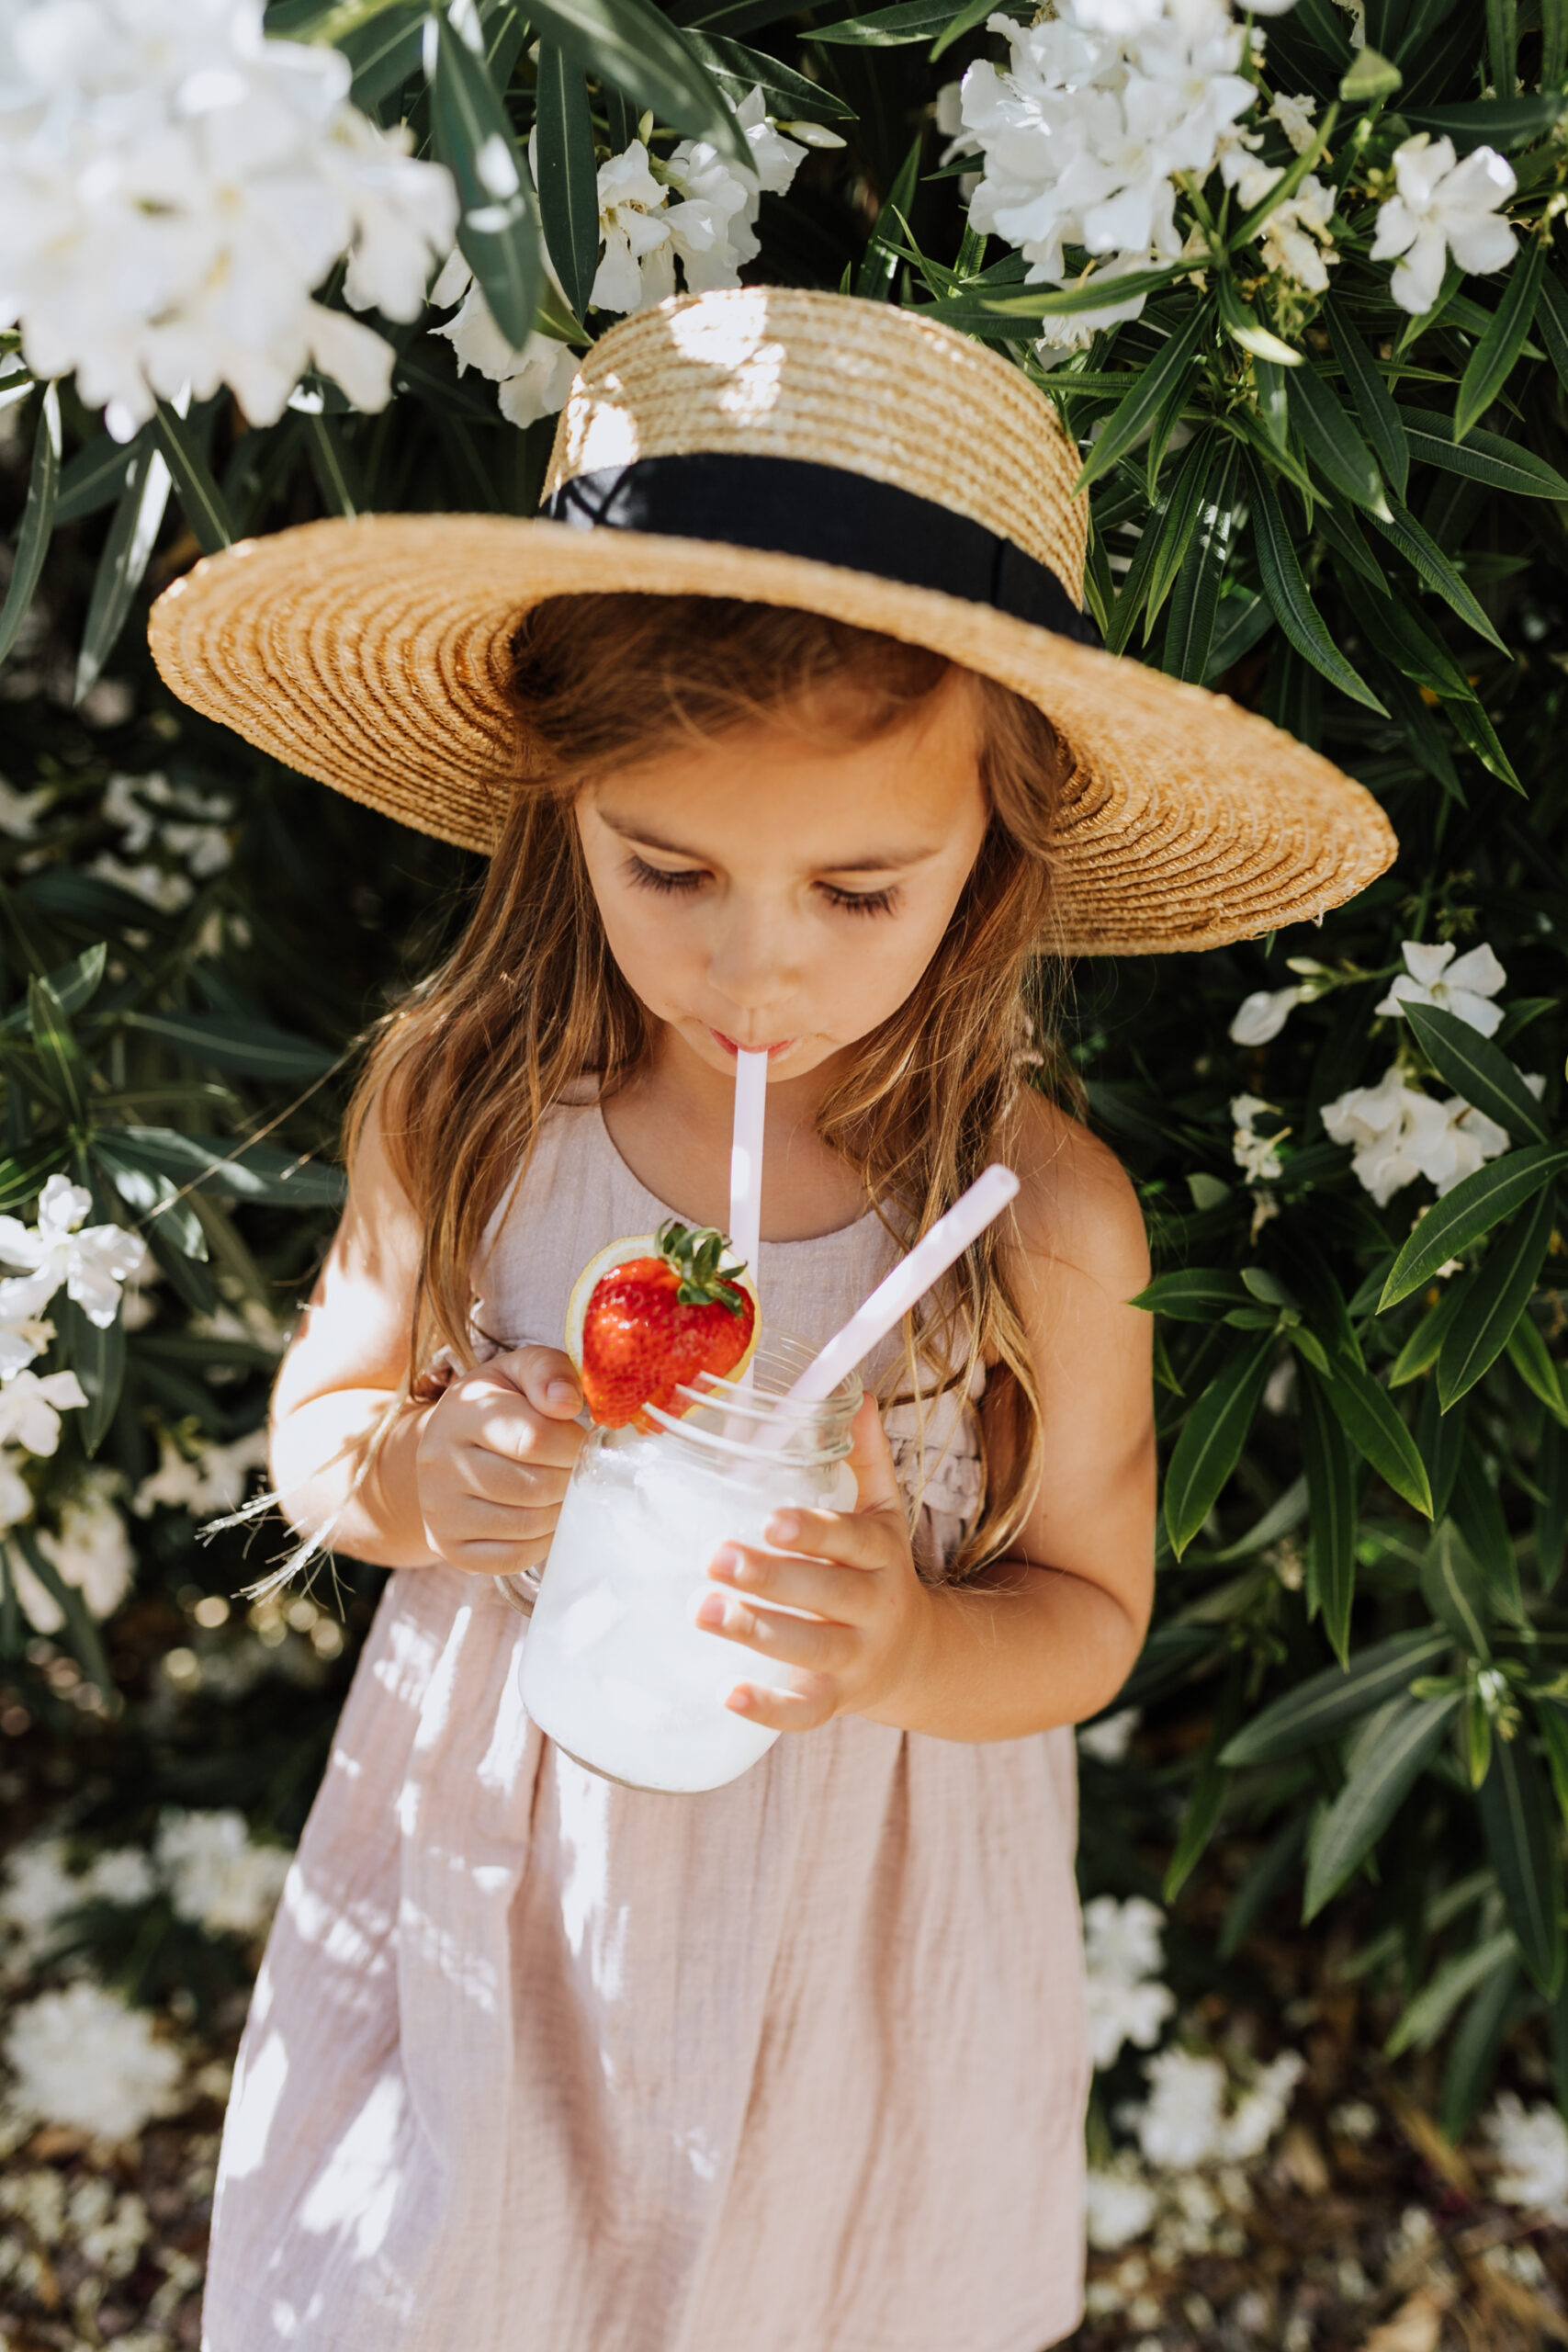 sipping lemonade in the springtime in our backyard with these reusable silicone straws from Grove. #sustainableswaps #reusablestraws #springtime #childhood #groveco